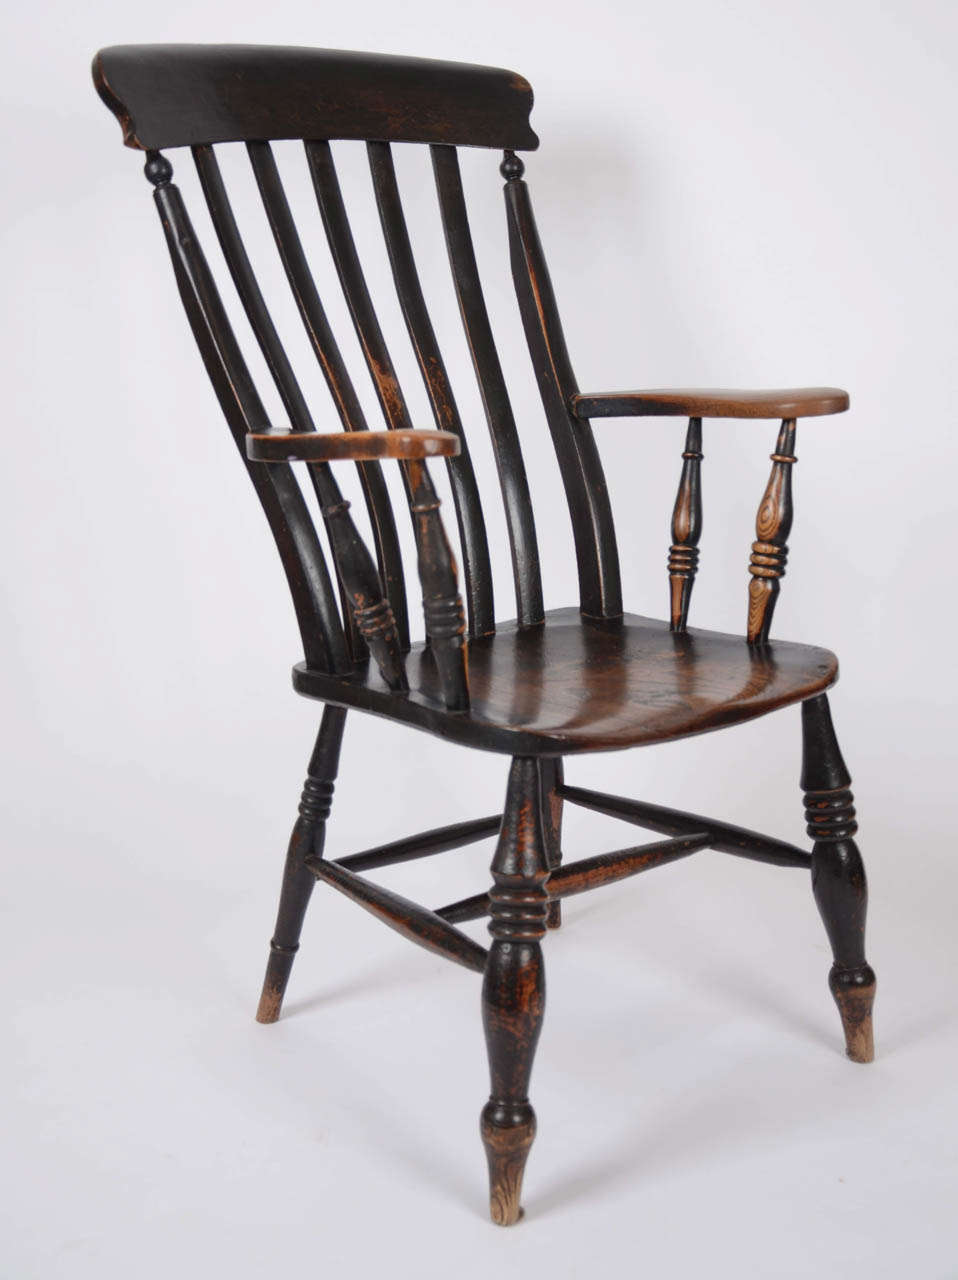 A 19th century beech and elm Thames Valley lathe back Windsor armchair, retaining much of the original painted surface.  The years of enjoyment (and it is incredibly comfortable!) and waxing mean that the chair has a lovely patina and colour with